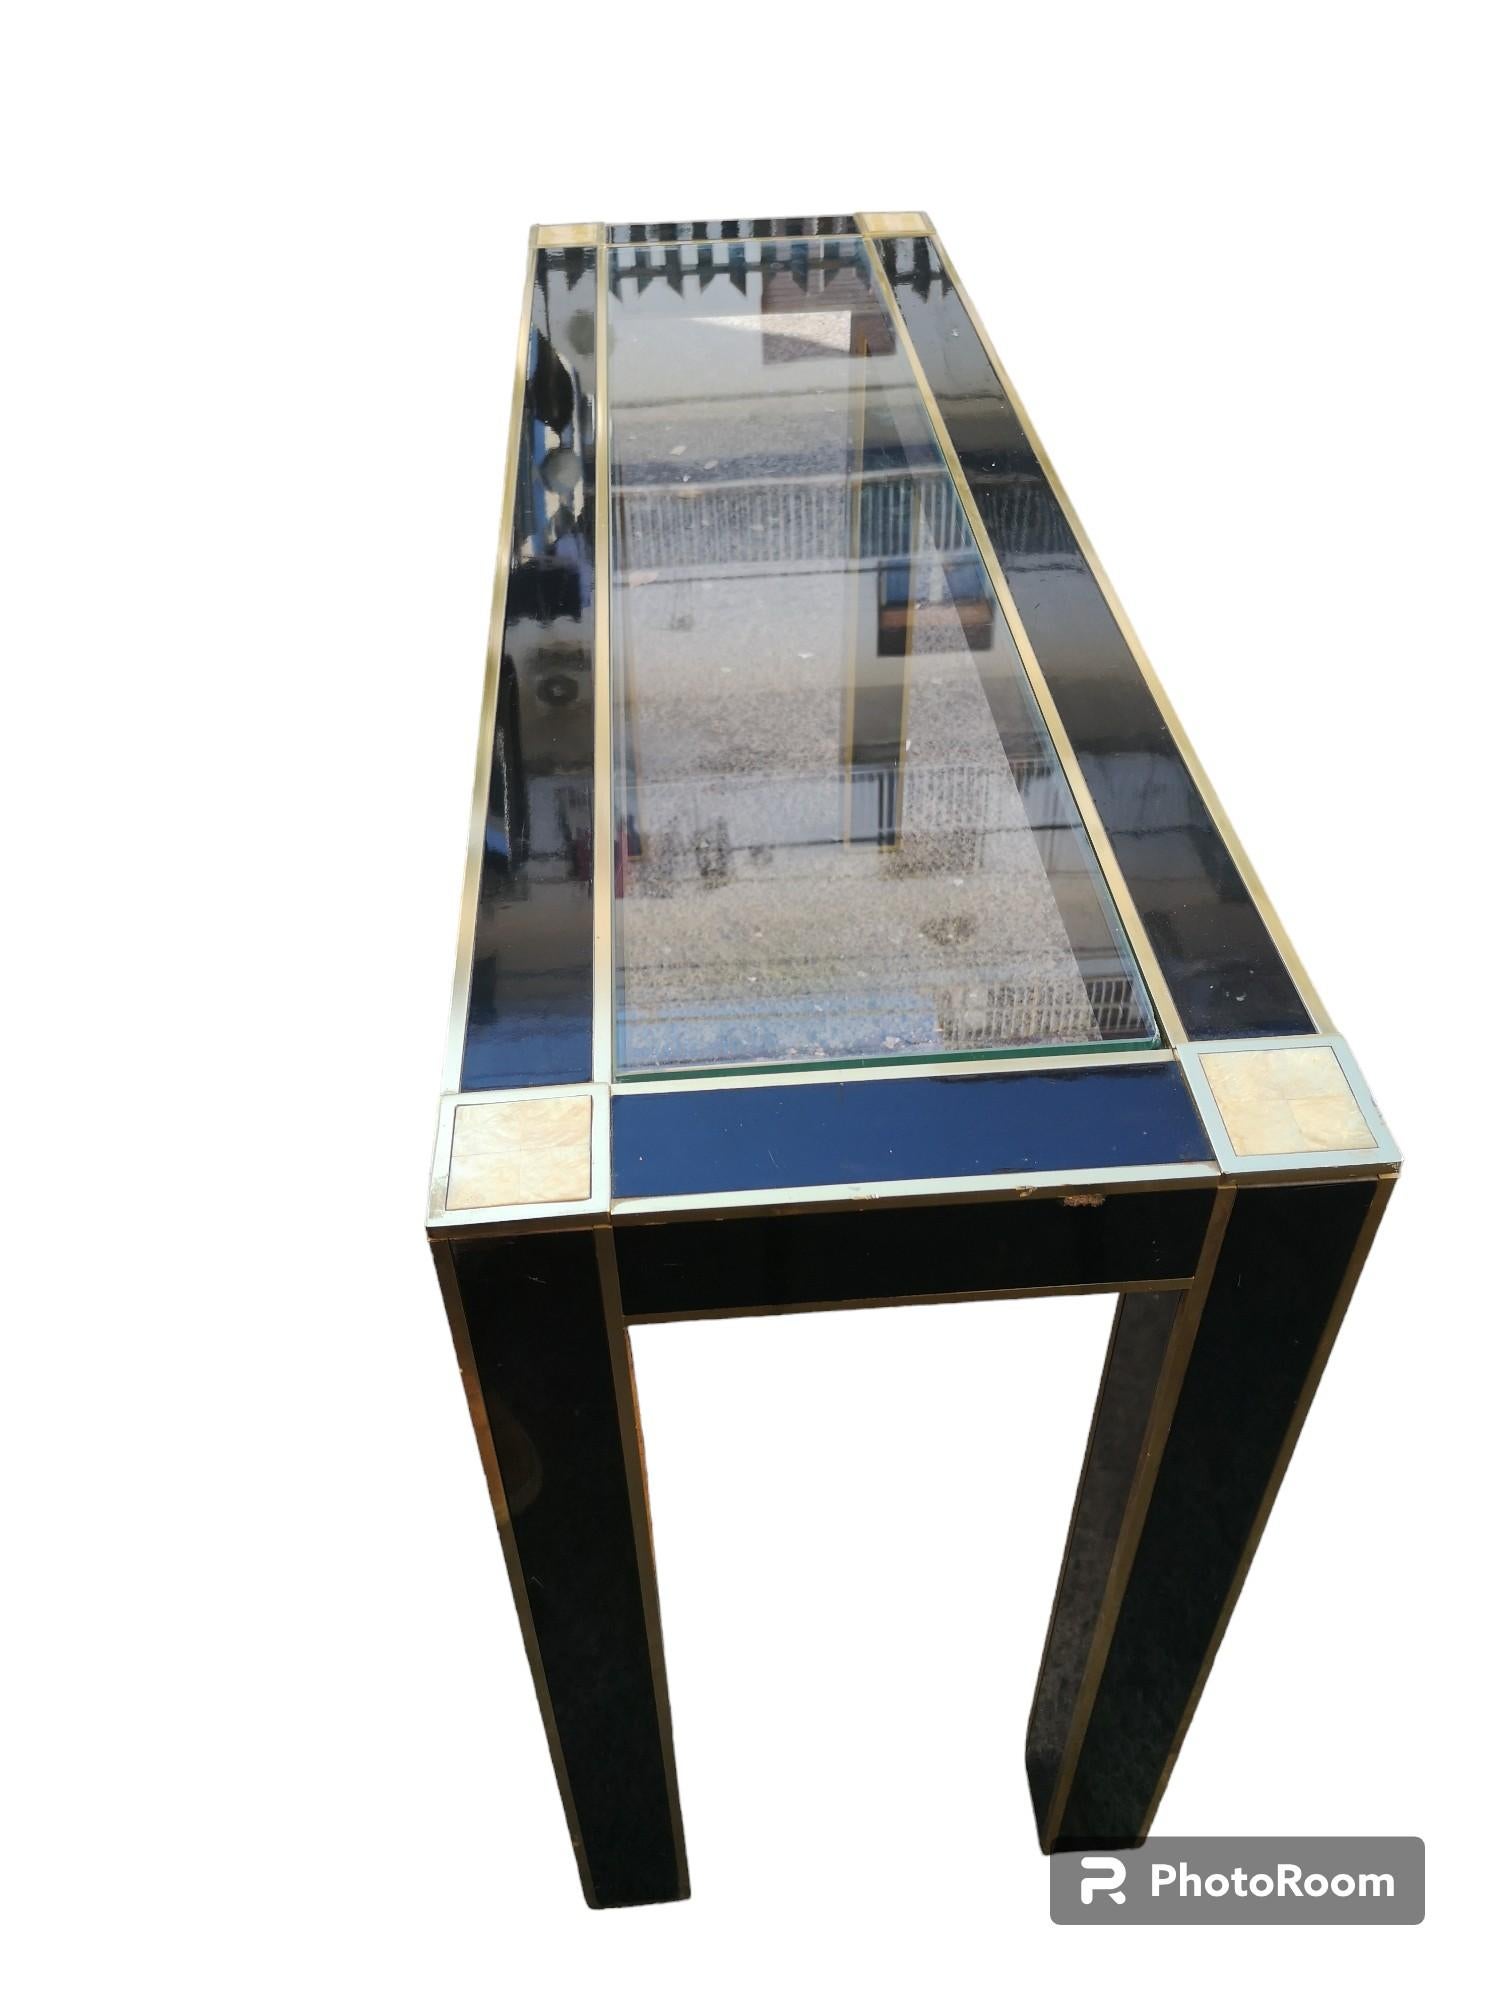 Console table with black lacquered wood frame with crystal top, brass profiles and mother-of-pearl details at corners.
the console measure:
Width   130 cm
Depth    40 cm
Height         74 cm
If interested I can send more detailed photos upon request.